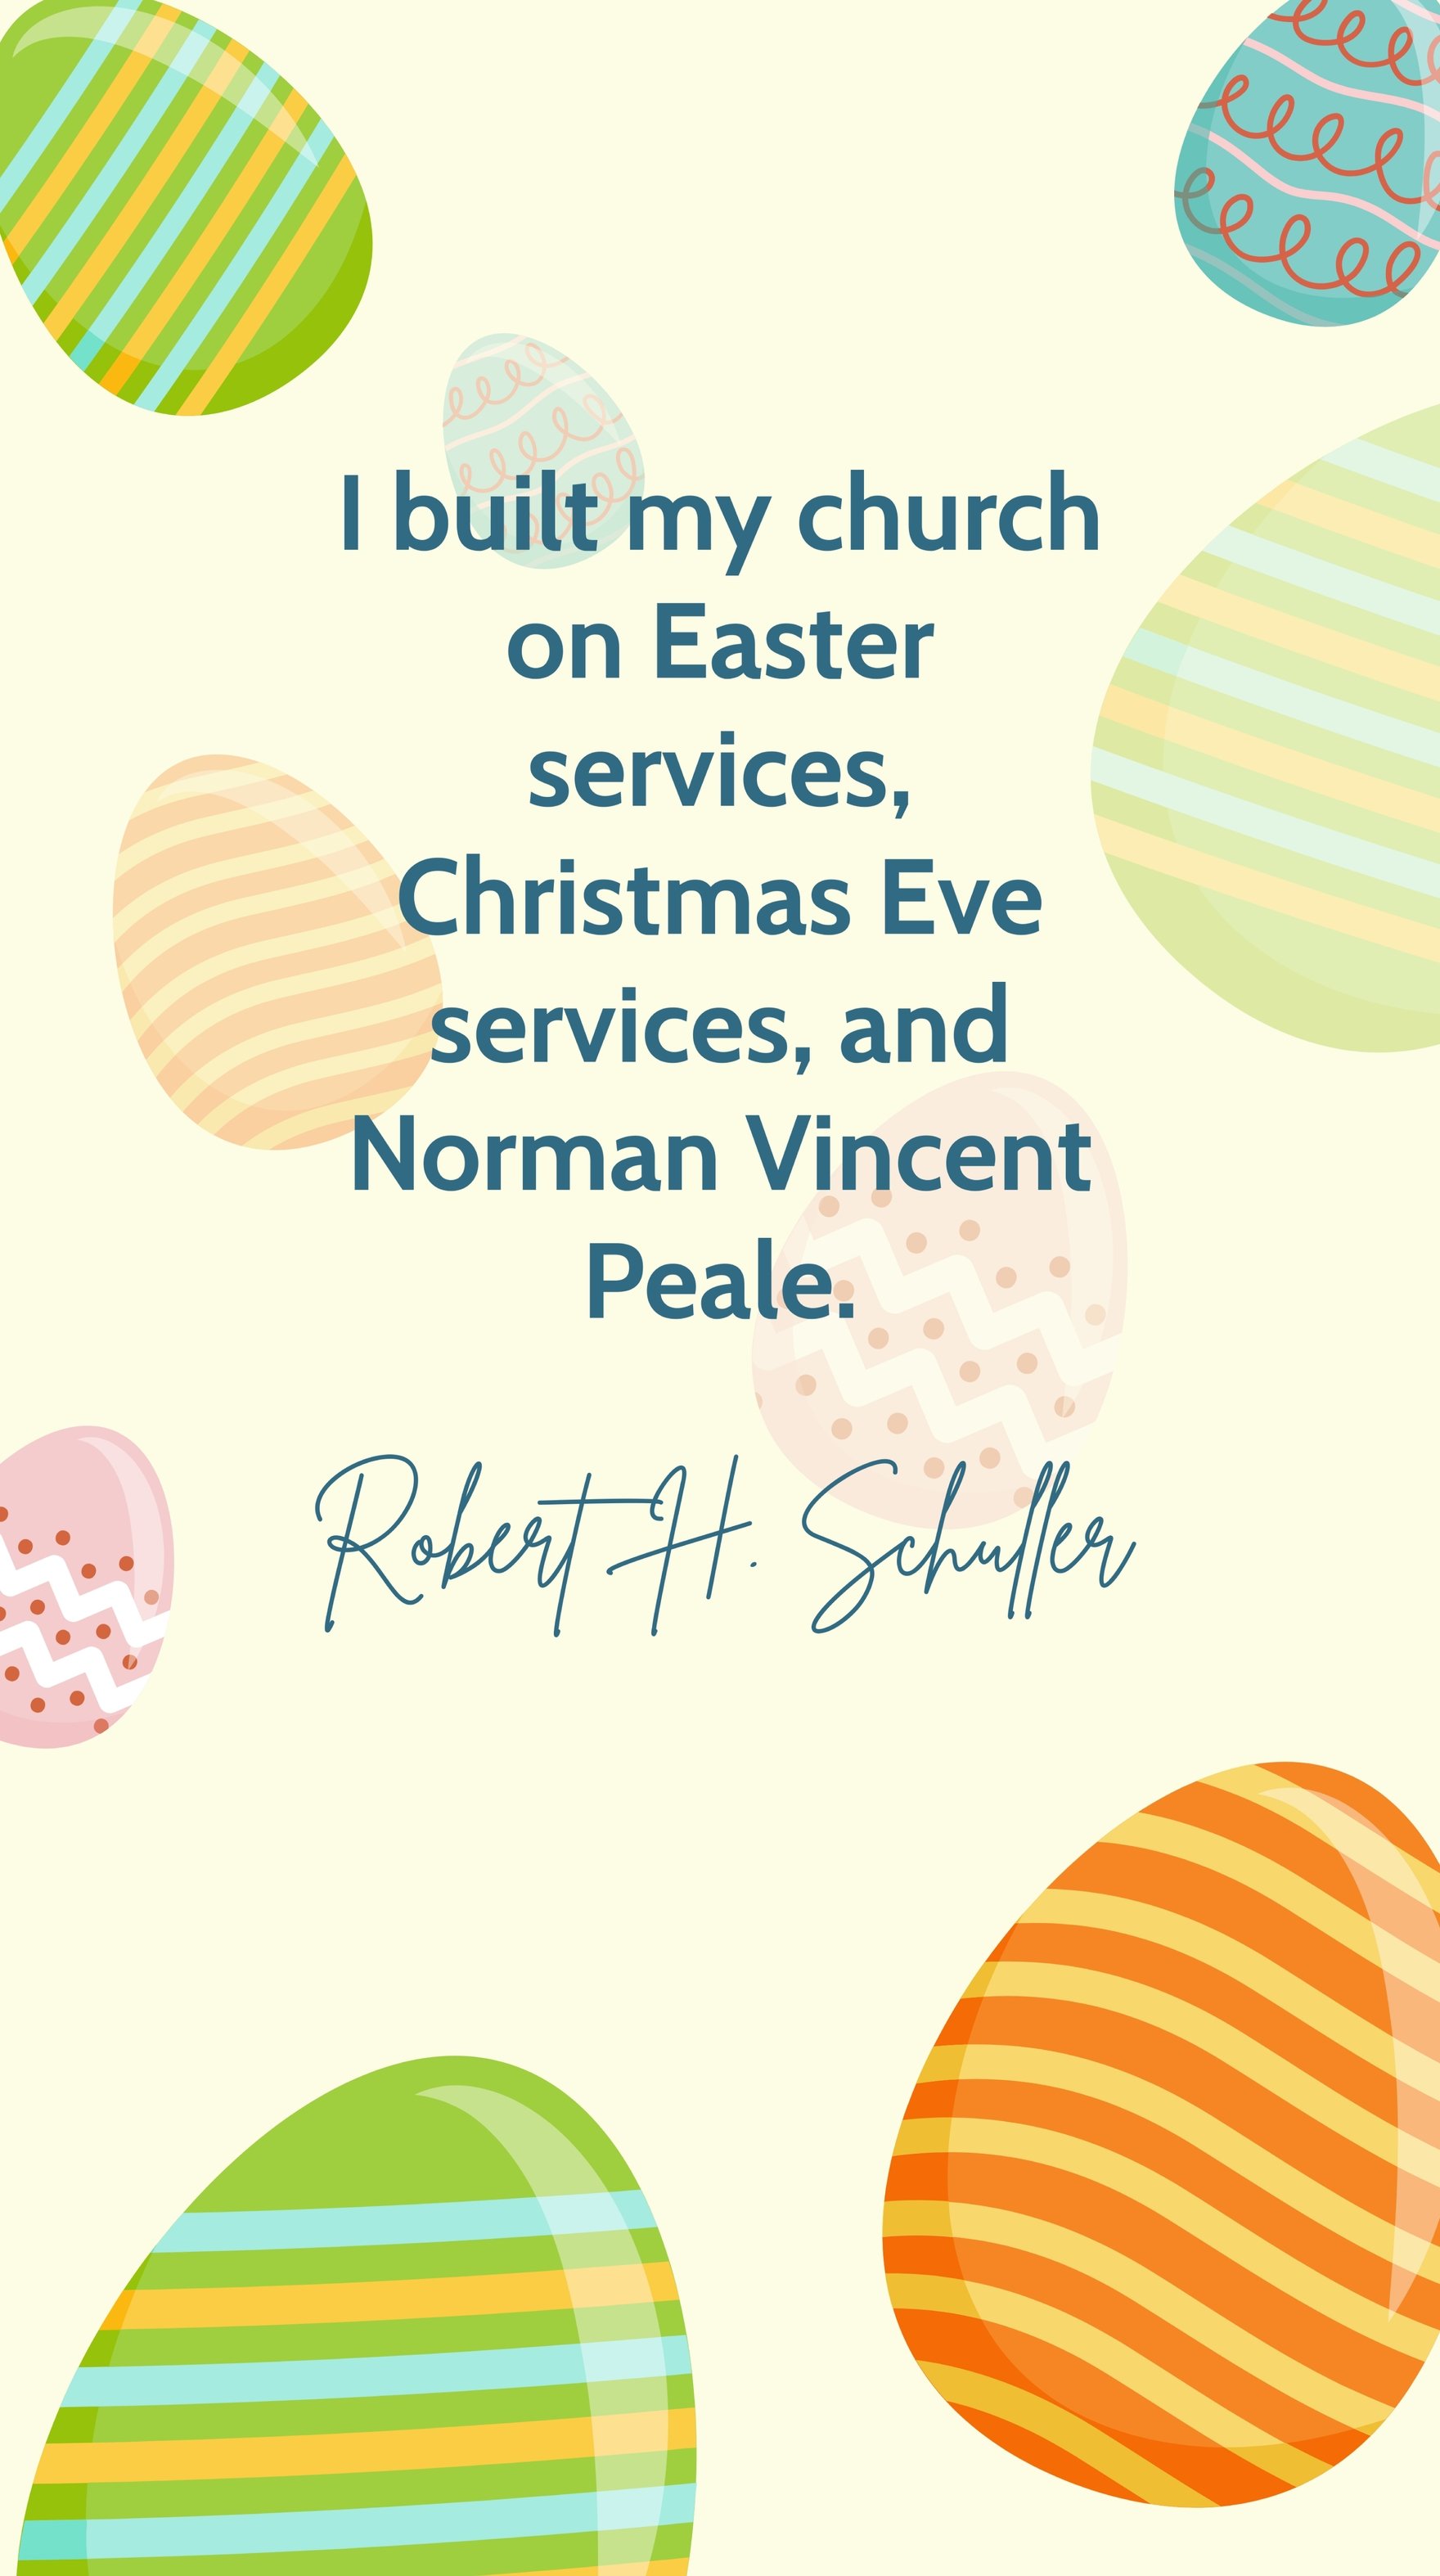 Free Robert H. Schuller - I built my church on Easter services, Christmas Eve services, and Norman Vincent Peale.